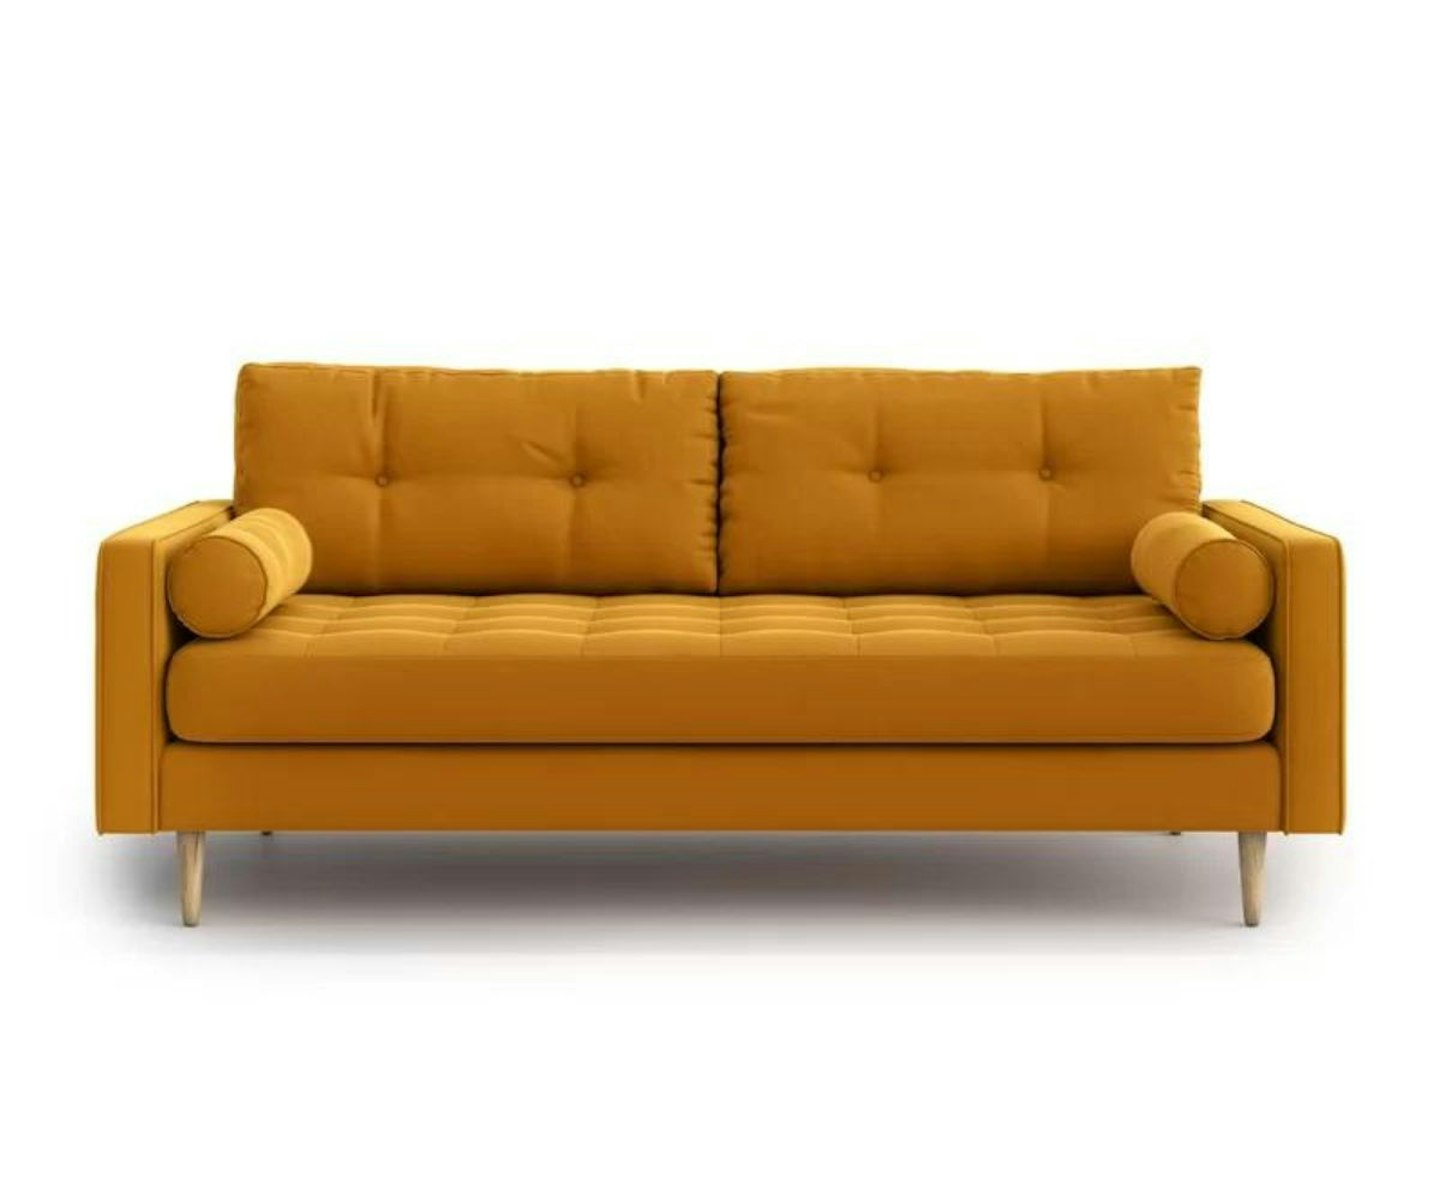 Stead 3 Seater Upholstered Sofa